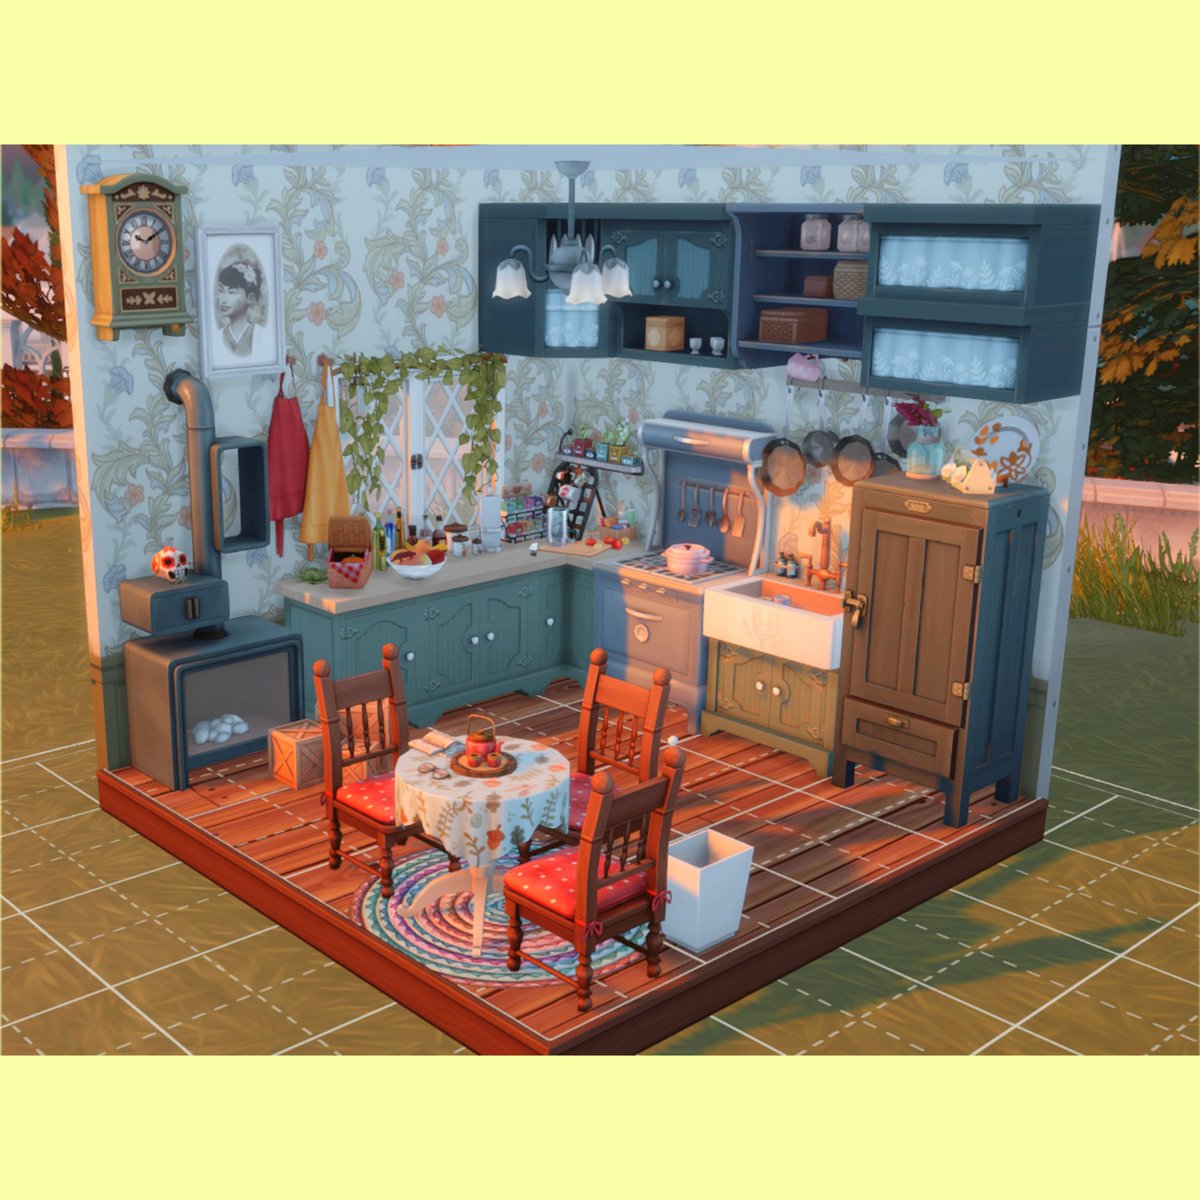 Day 1 of @HeraldSims #NYNewRooms Challenge, Grandma's Kitchen 🌼#ShowUsYourBuild #TheSims4